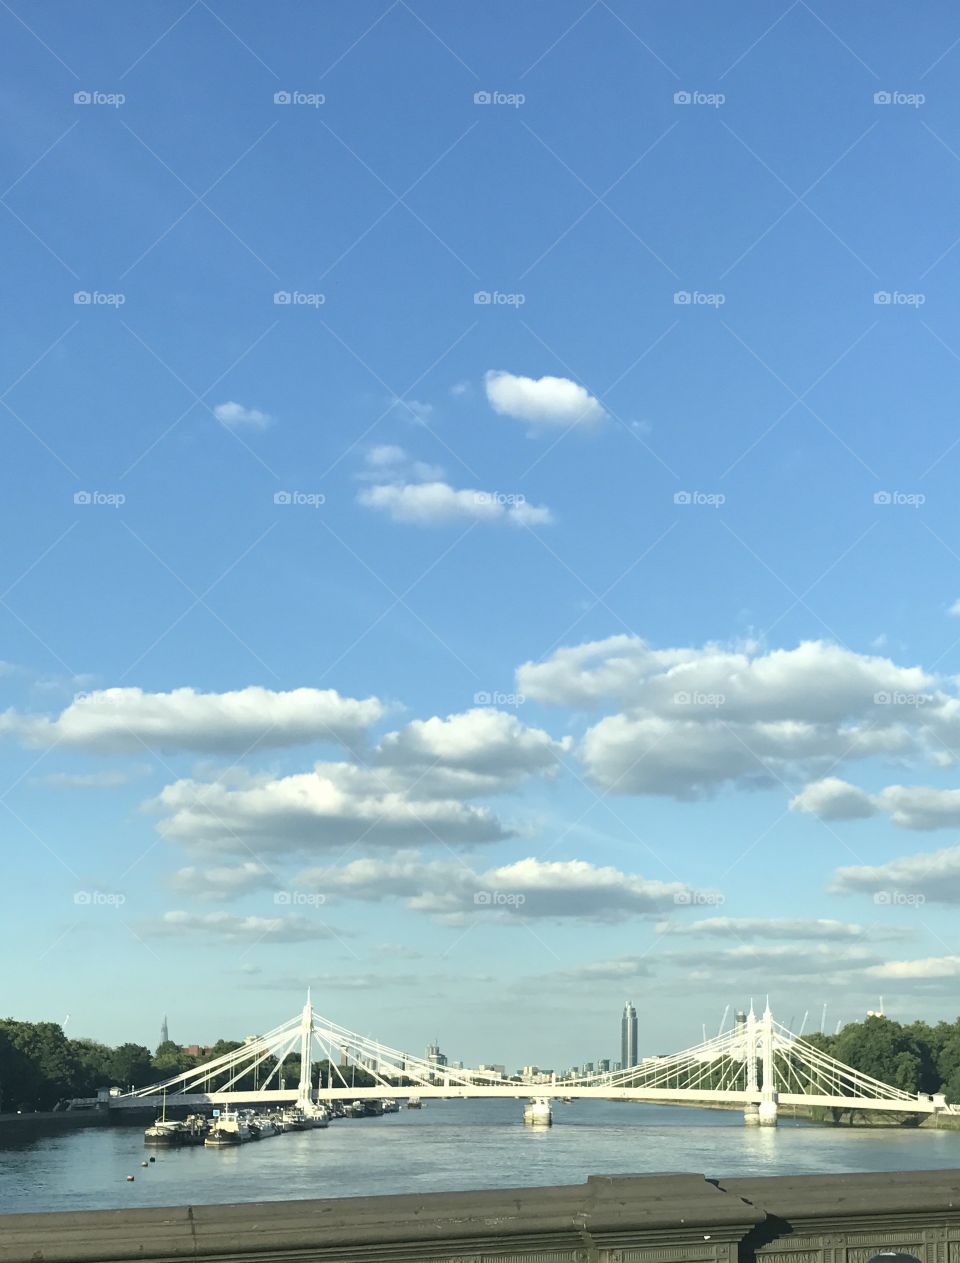 Clouds over the Thames